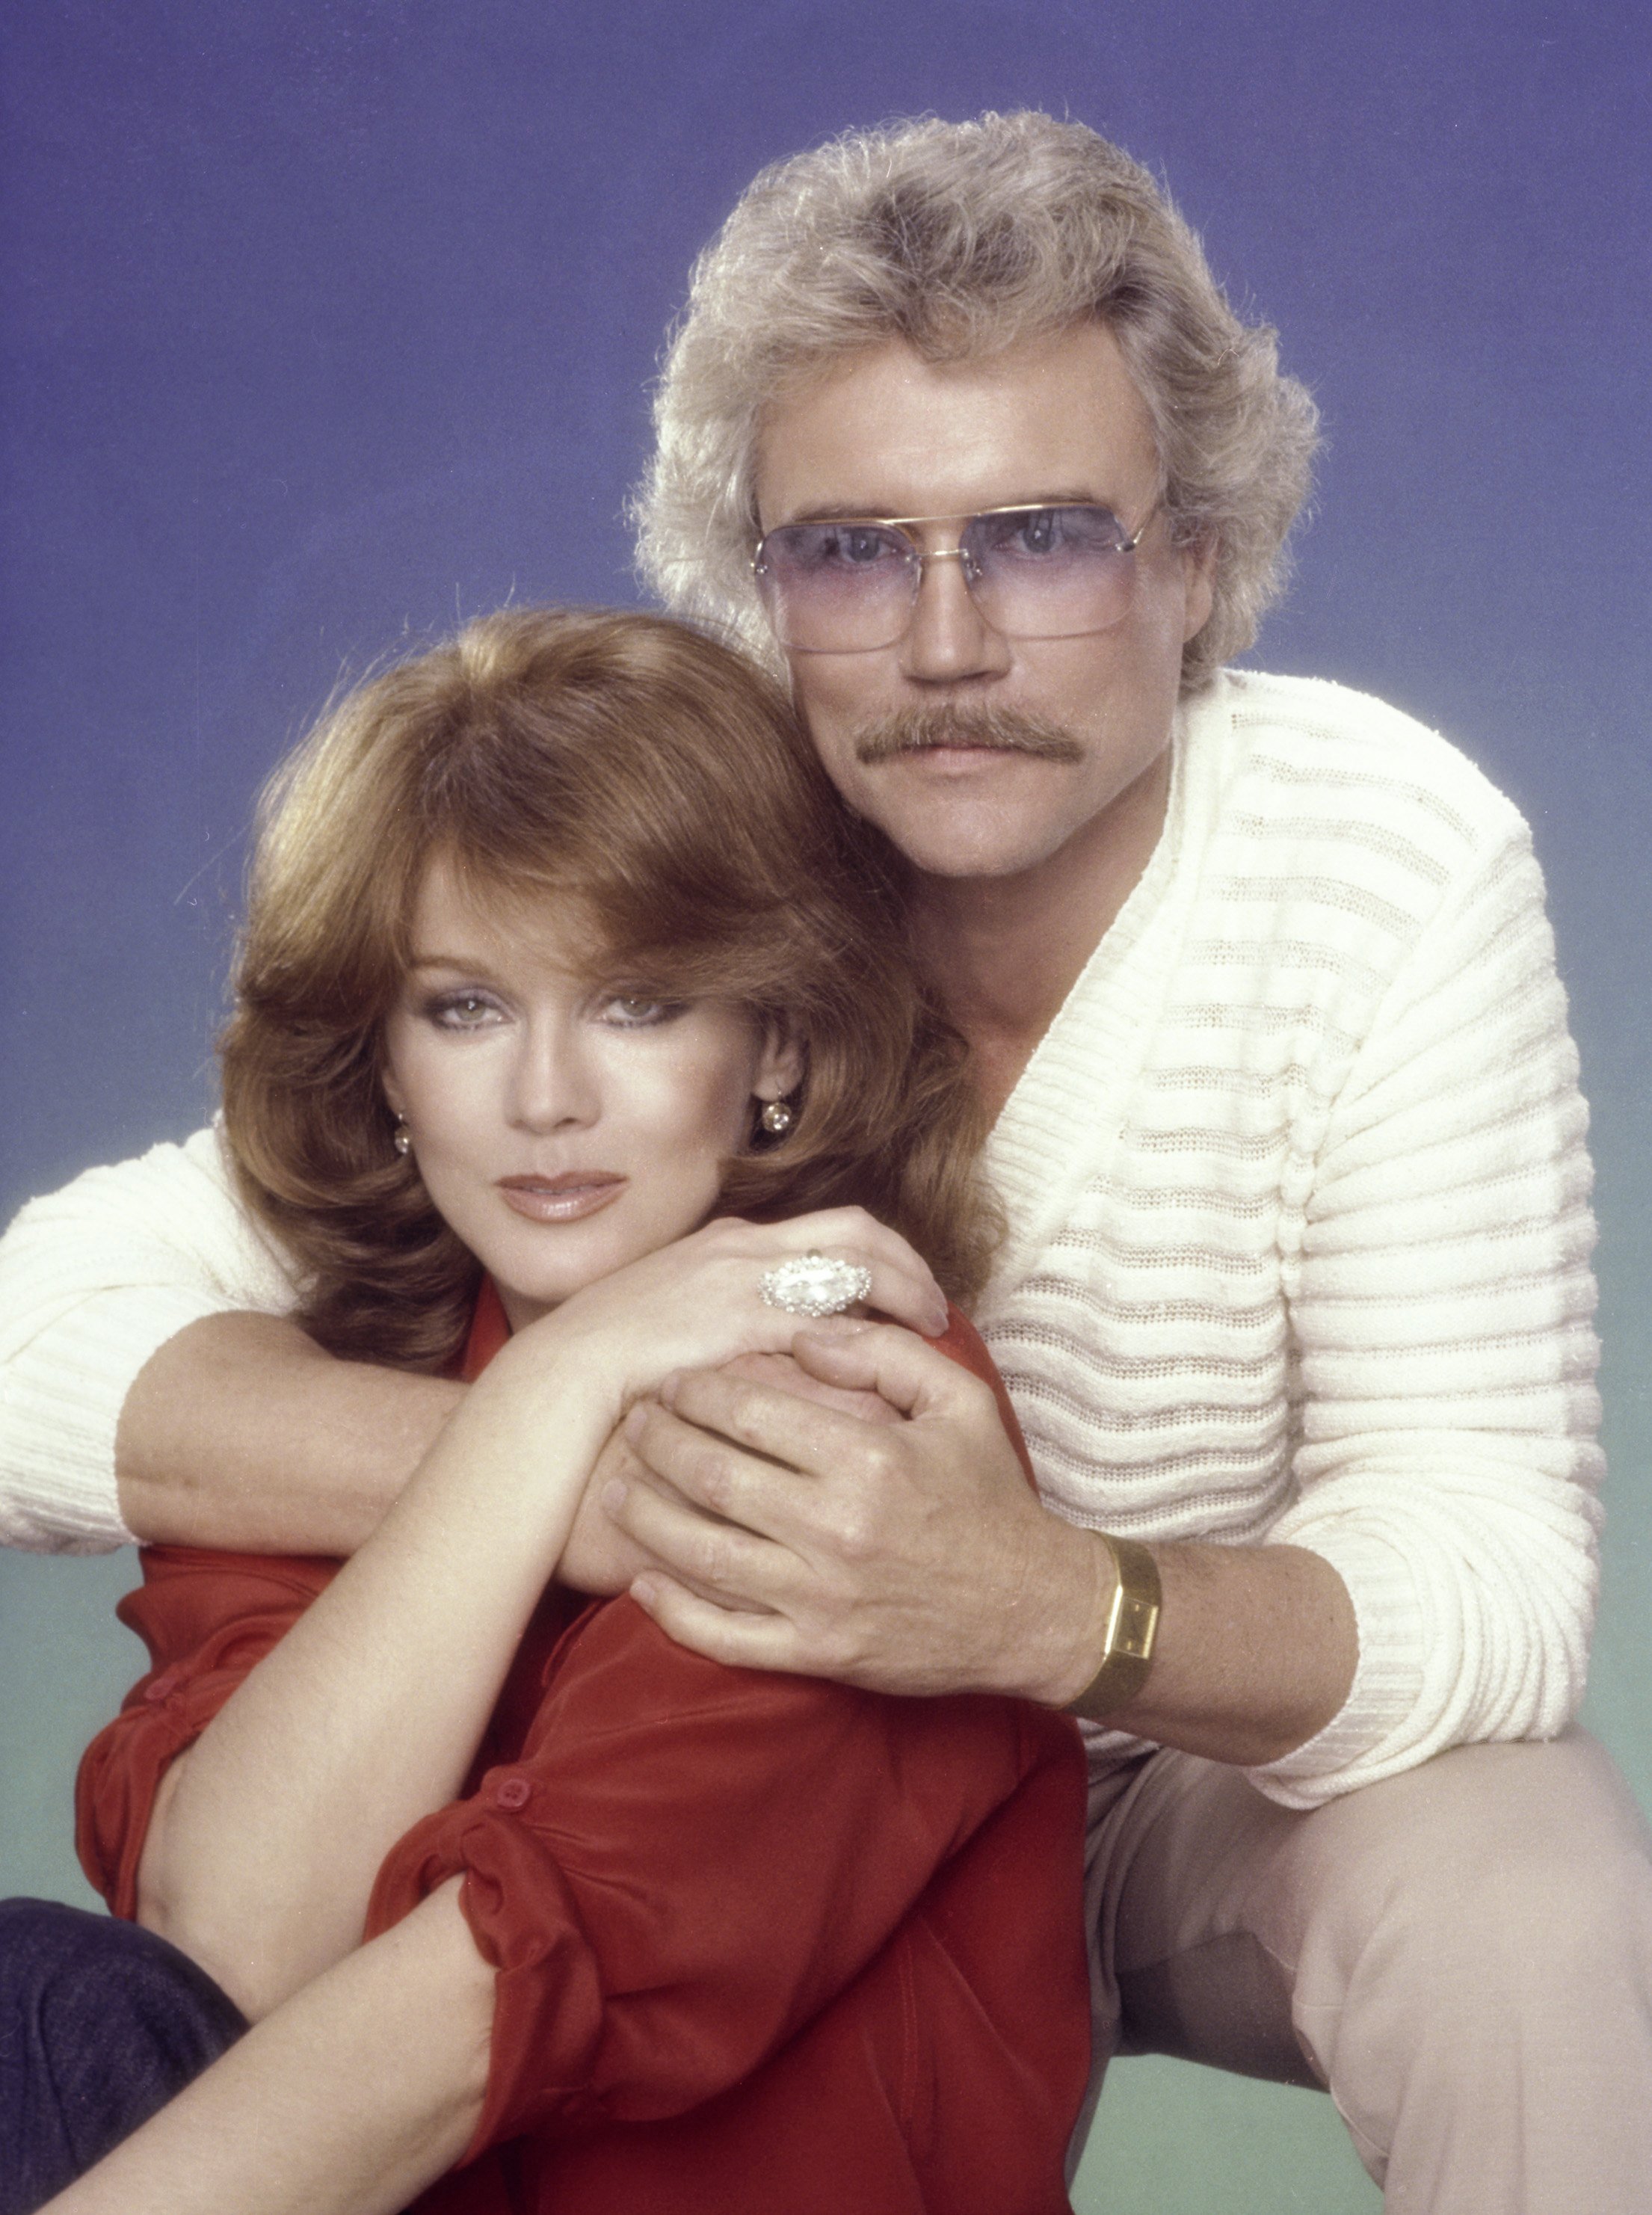 Ann-Margret and husband Roger smith pose for a portrait in 1980 in Los Angeles, California. / Source: Getty Images